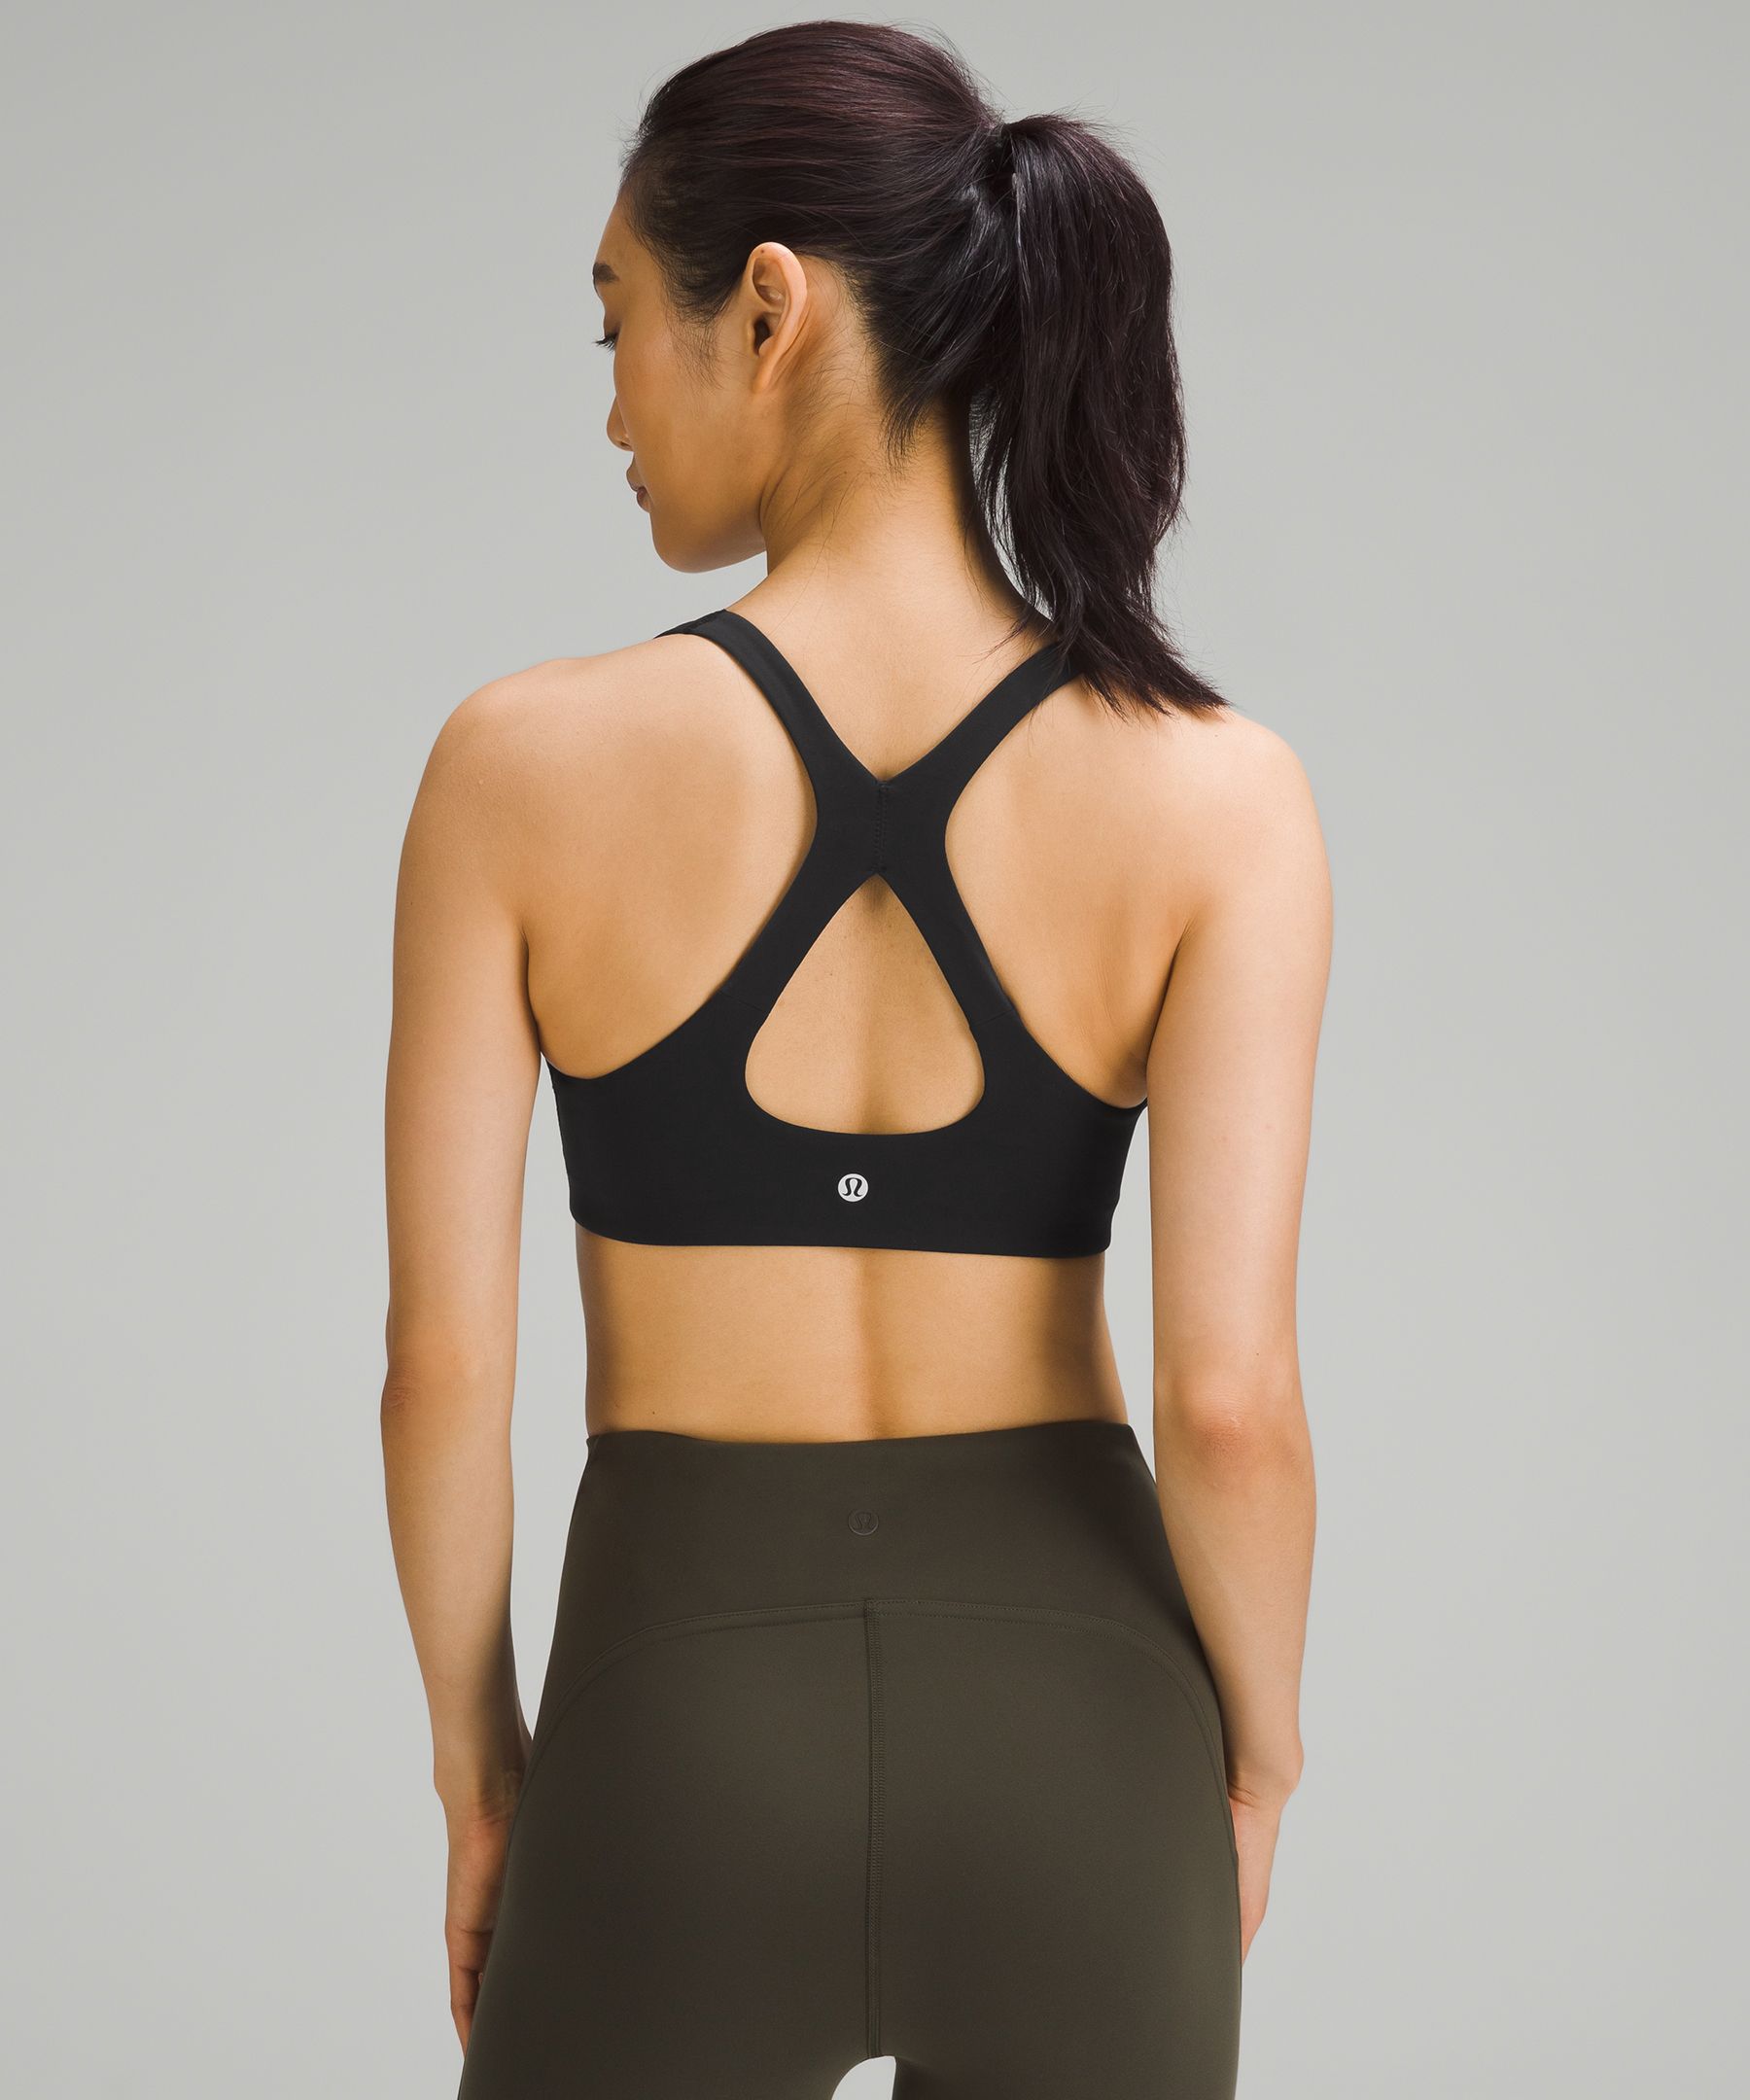  Sports Women's Clothes Light Support B/C Cups Yoga